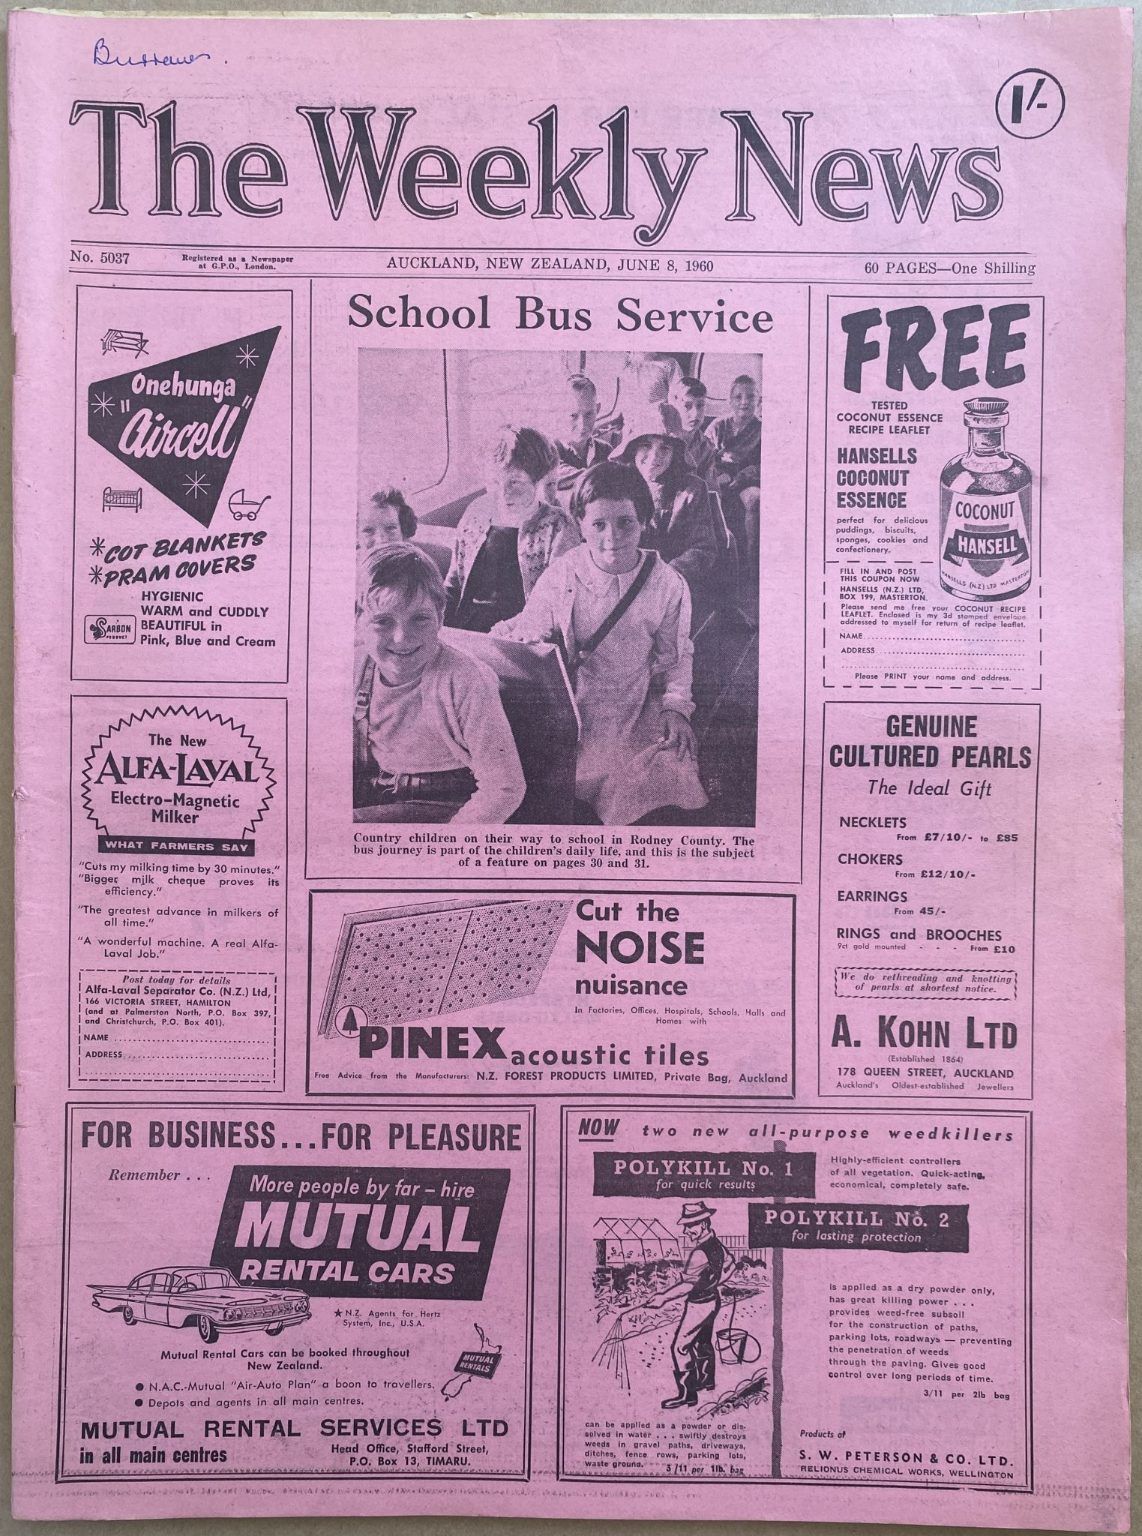 OLD NEWSPAPER: The Weekly News, No. 5037, 8 June 1960